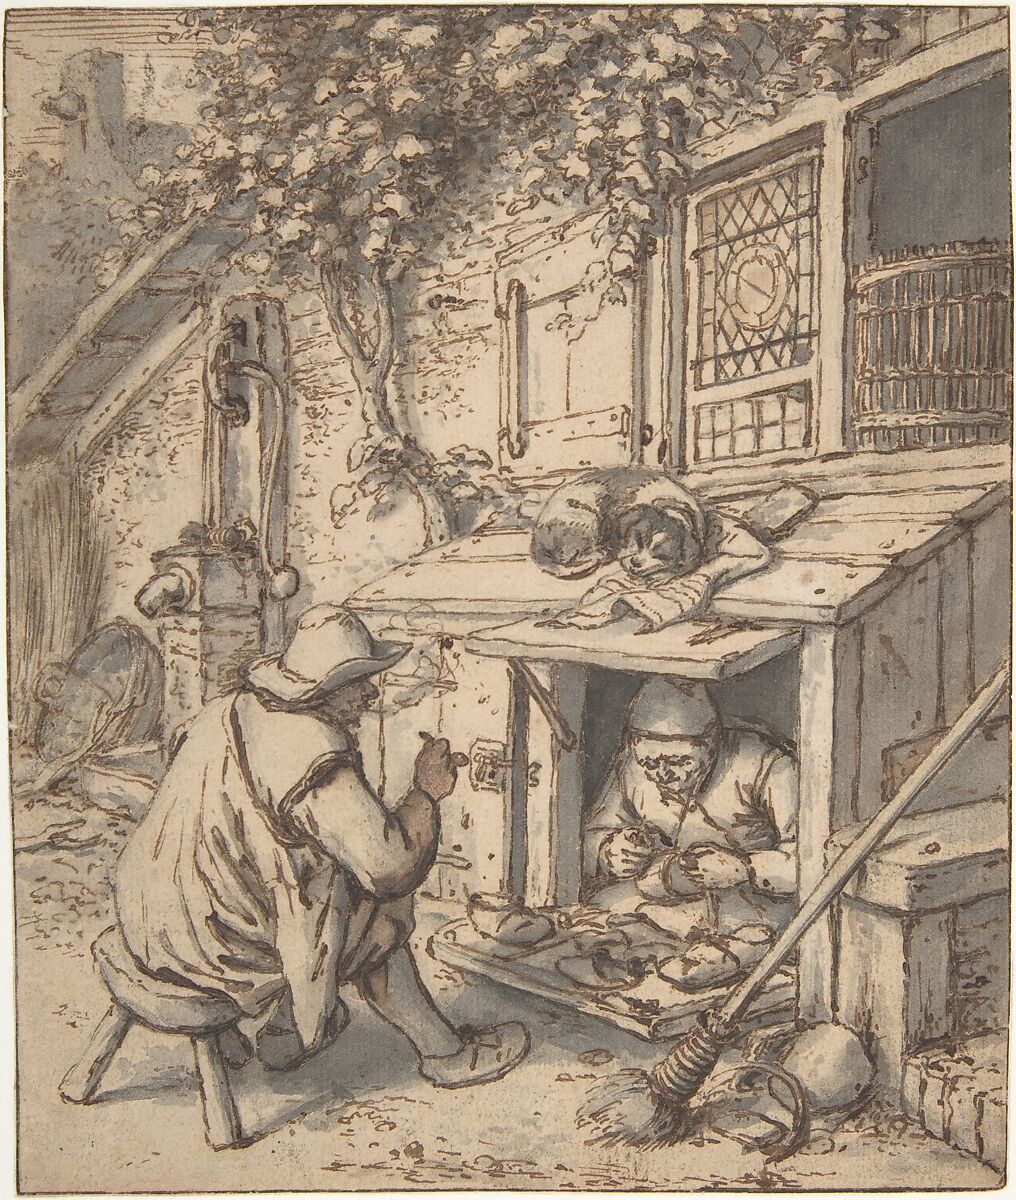 The Cobbler, Adriaen van Ostade (Dutch, Haarlem 1610–1685 Haarlem), Pen and brown ink, brush and gray wash, over graphite underdrawing. Incised for transfer. 